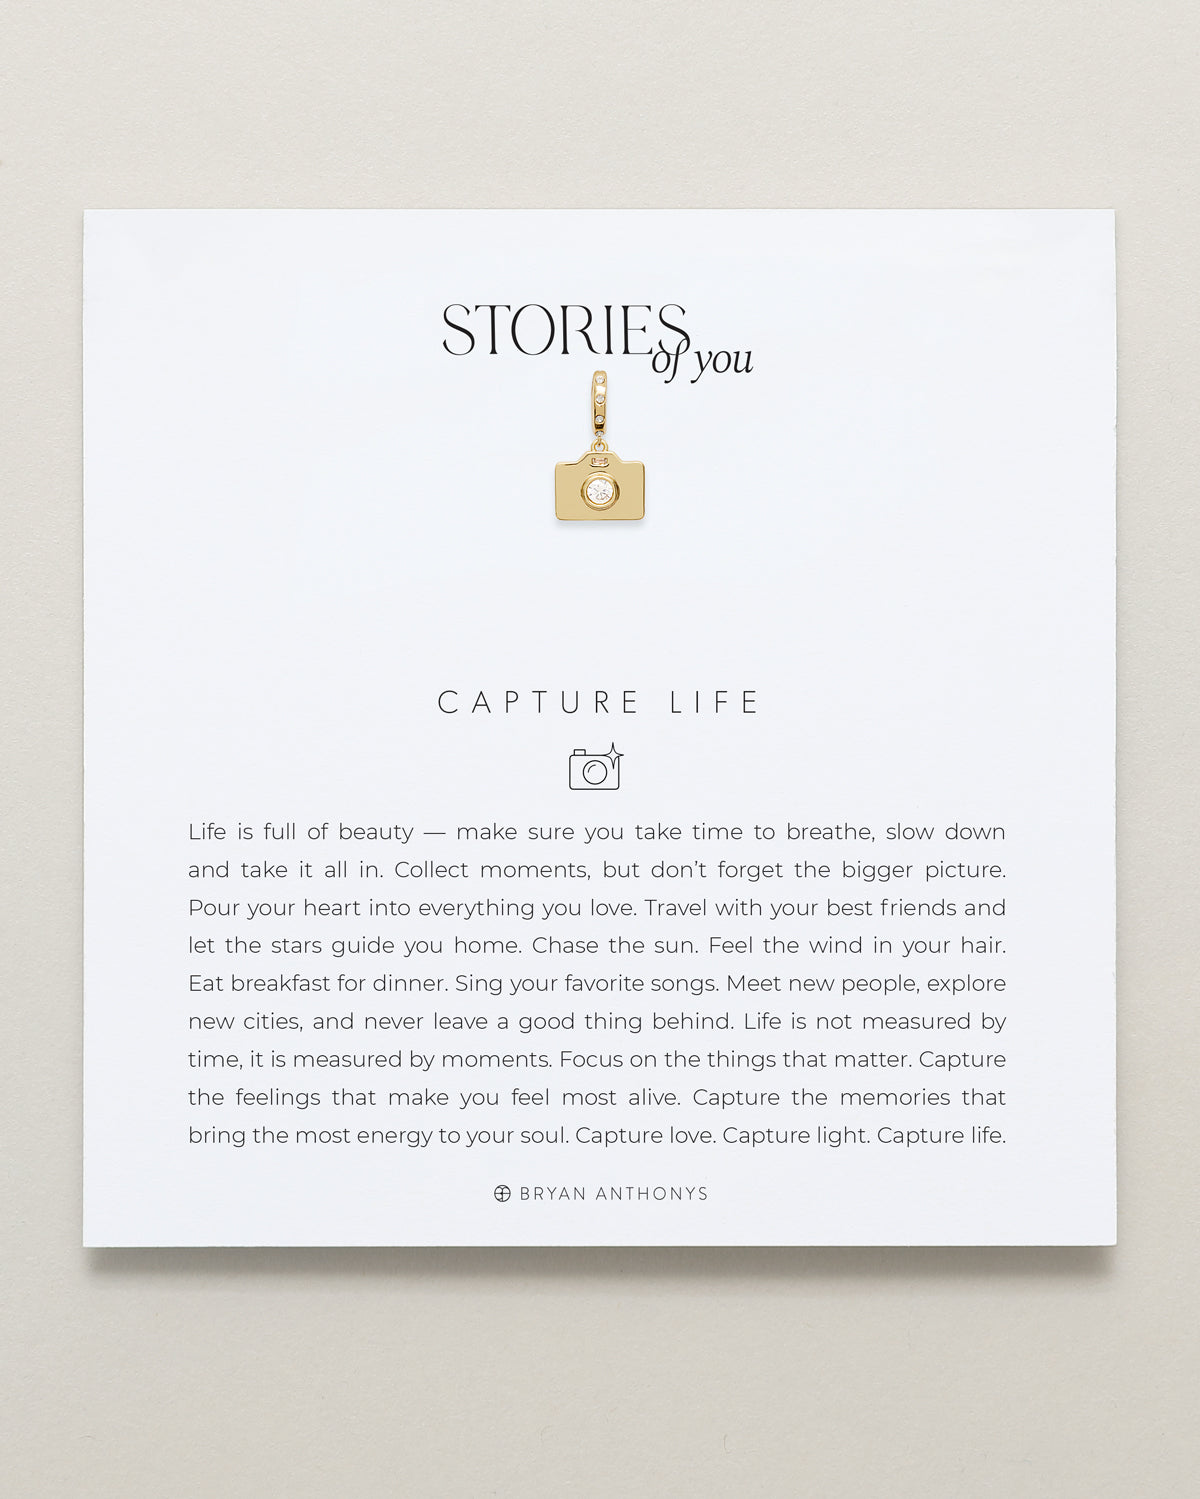 Stories of You — Paperclip Chain Necklace